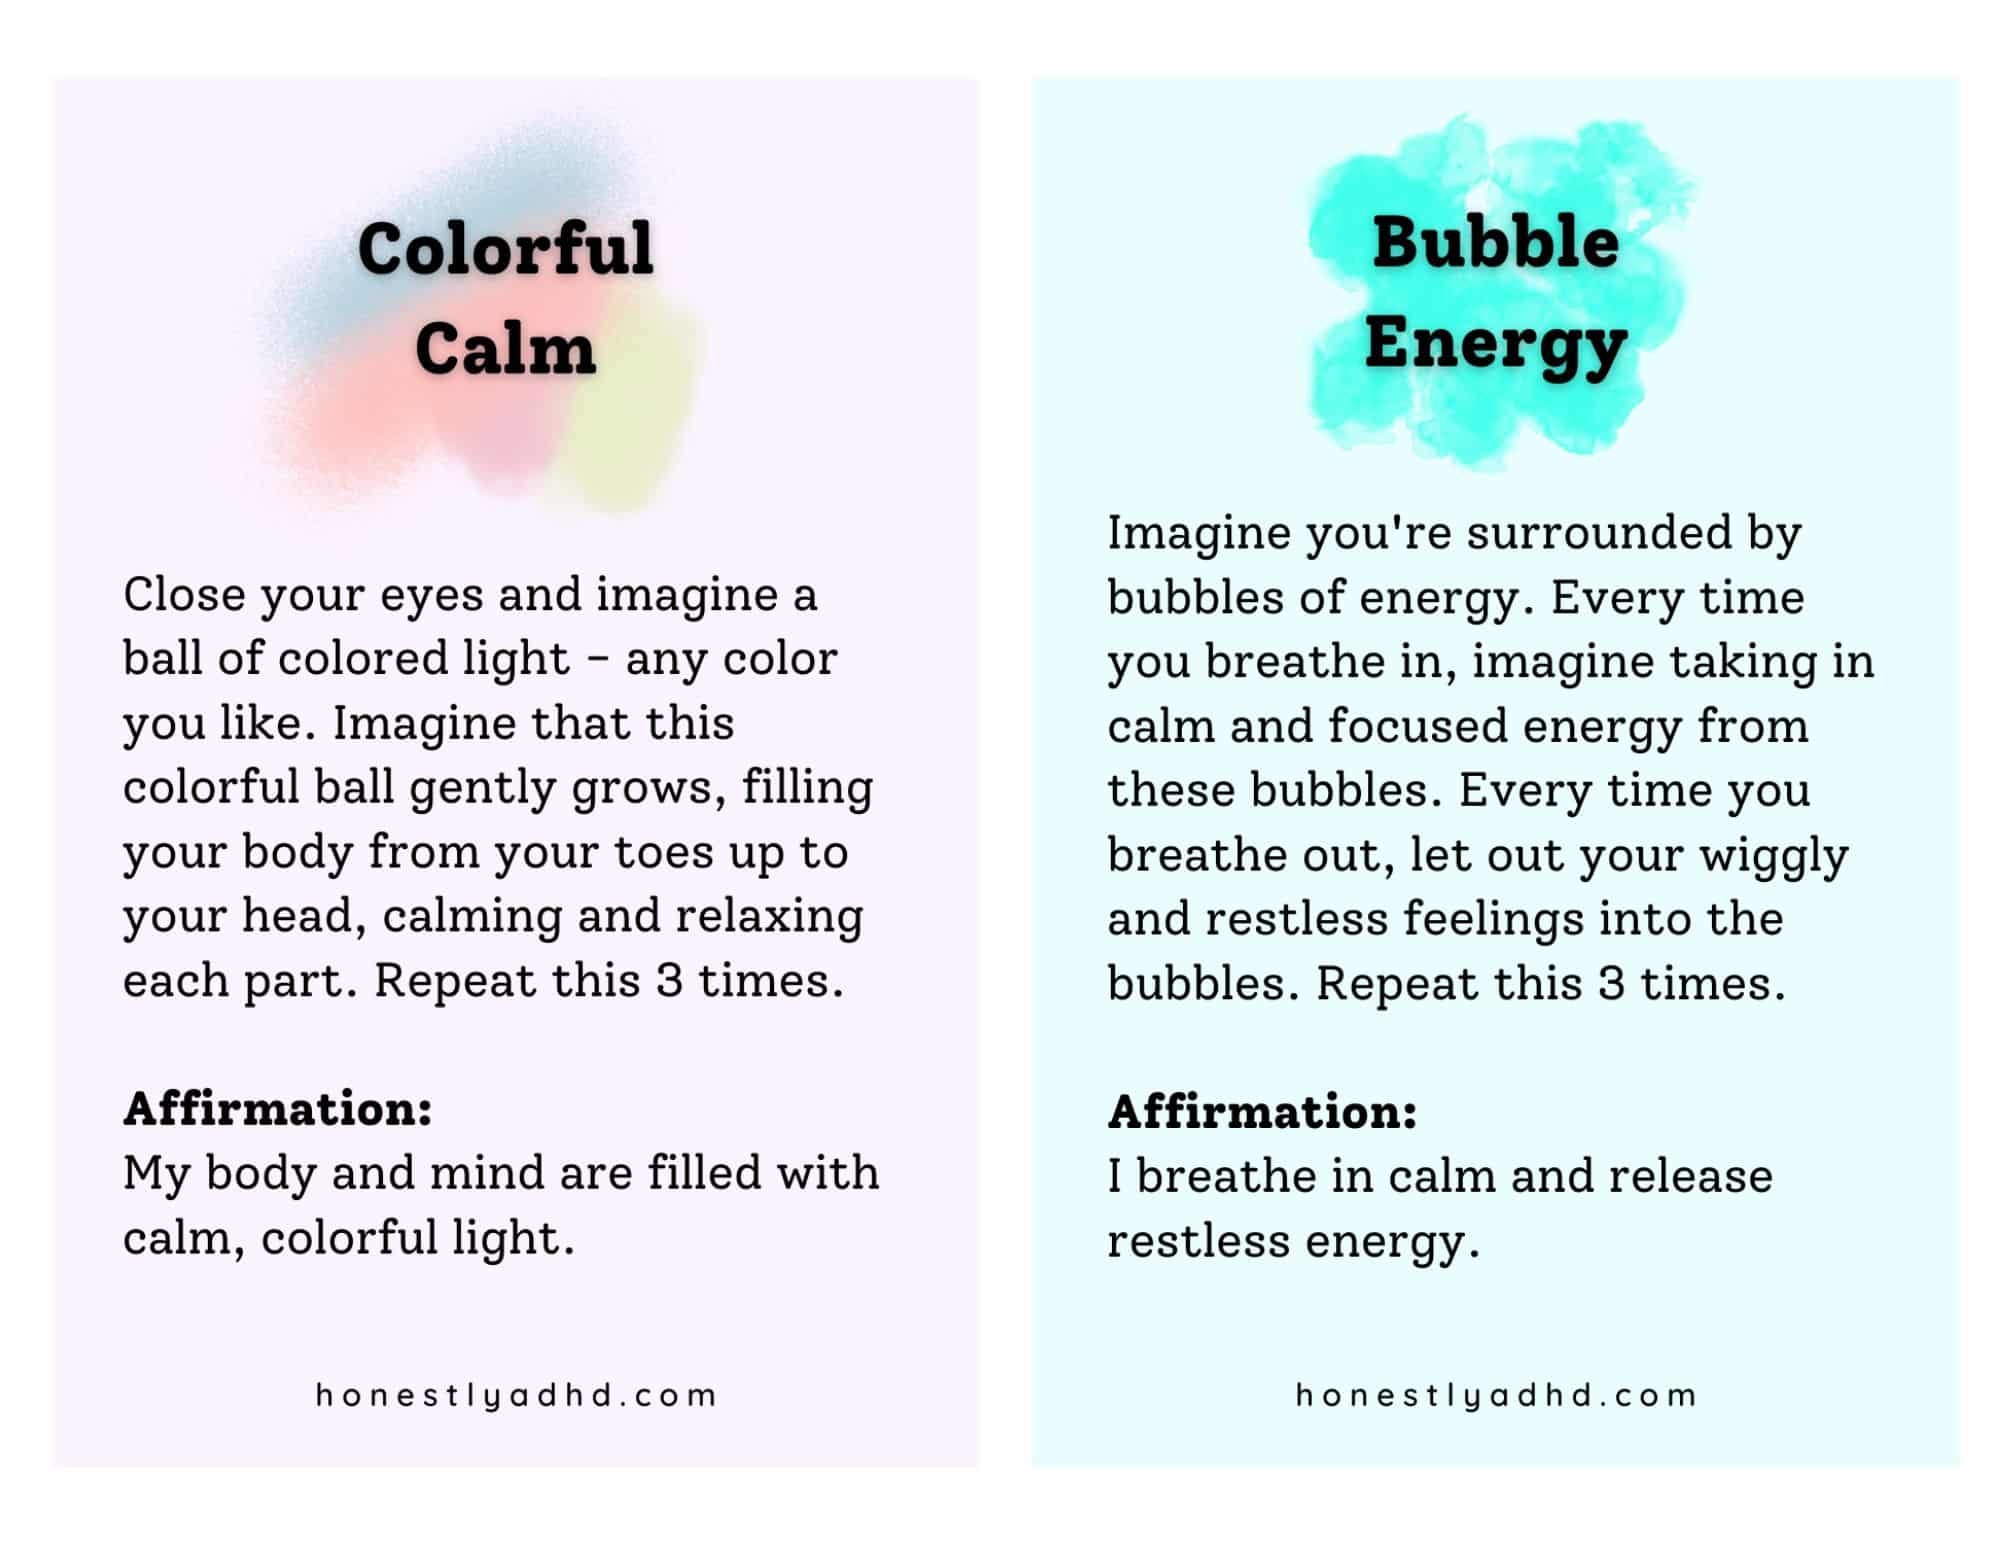 Example Meditation tricks for adhd kids, titled "colorful calm" and "bubble energy."